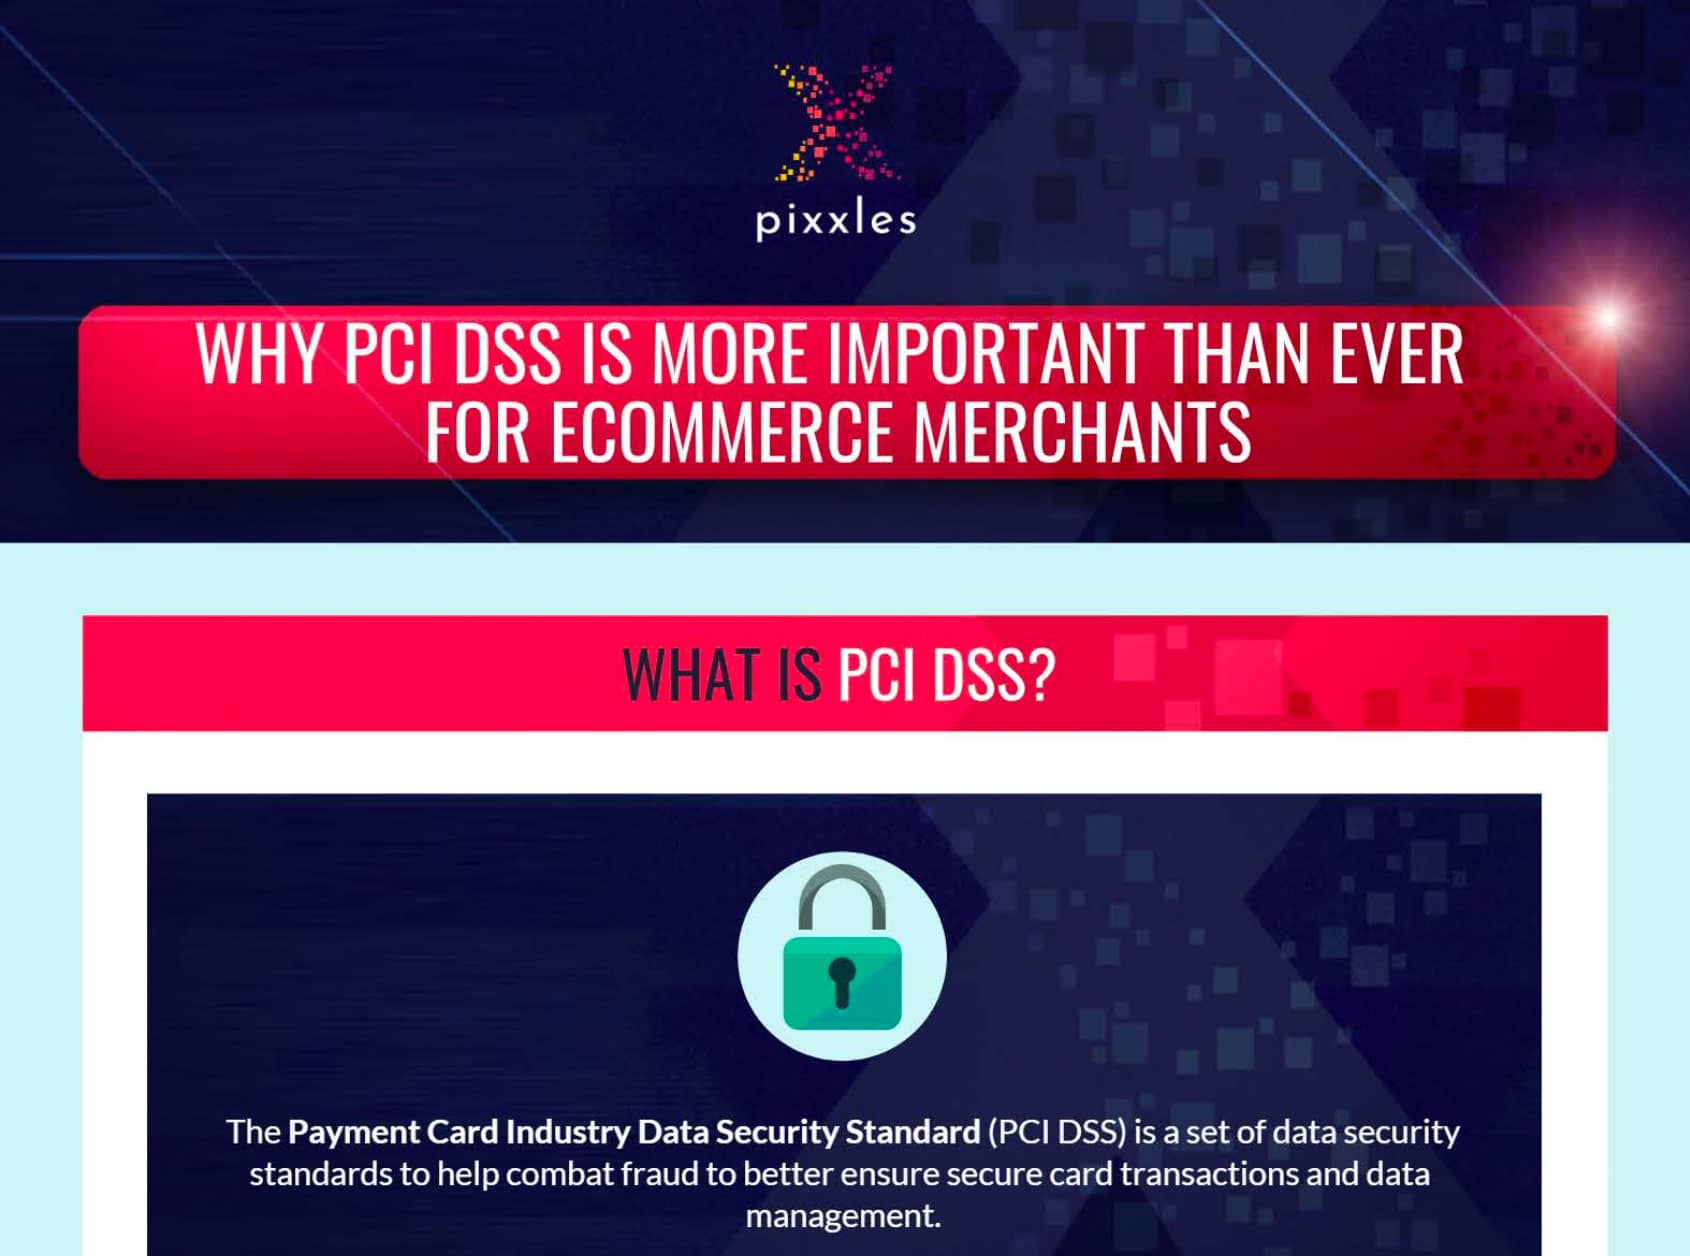 Why PCI DSS is more important than ever for ecommerce merchants